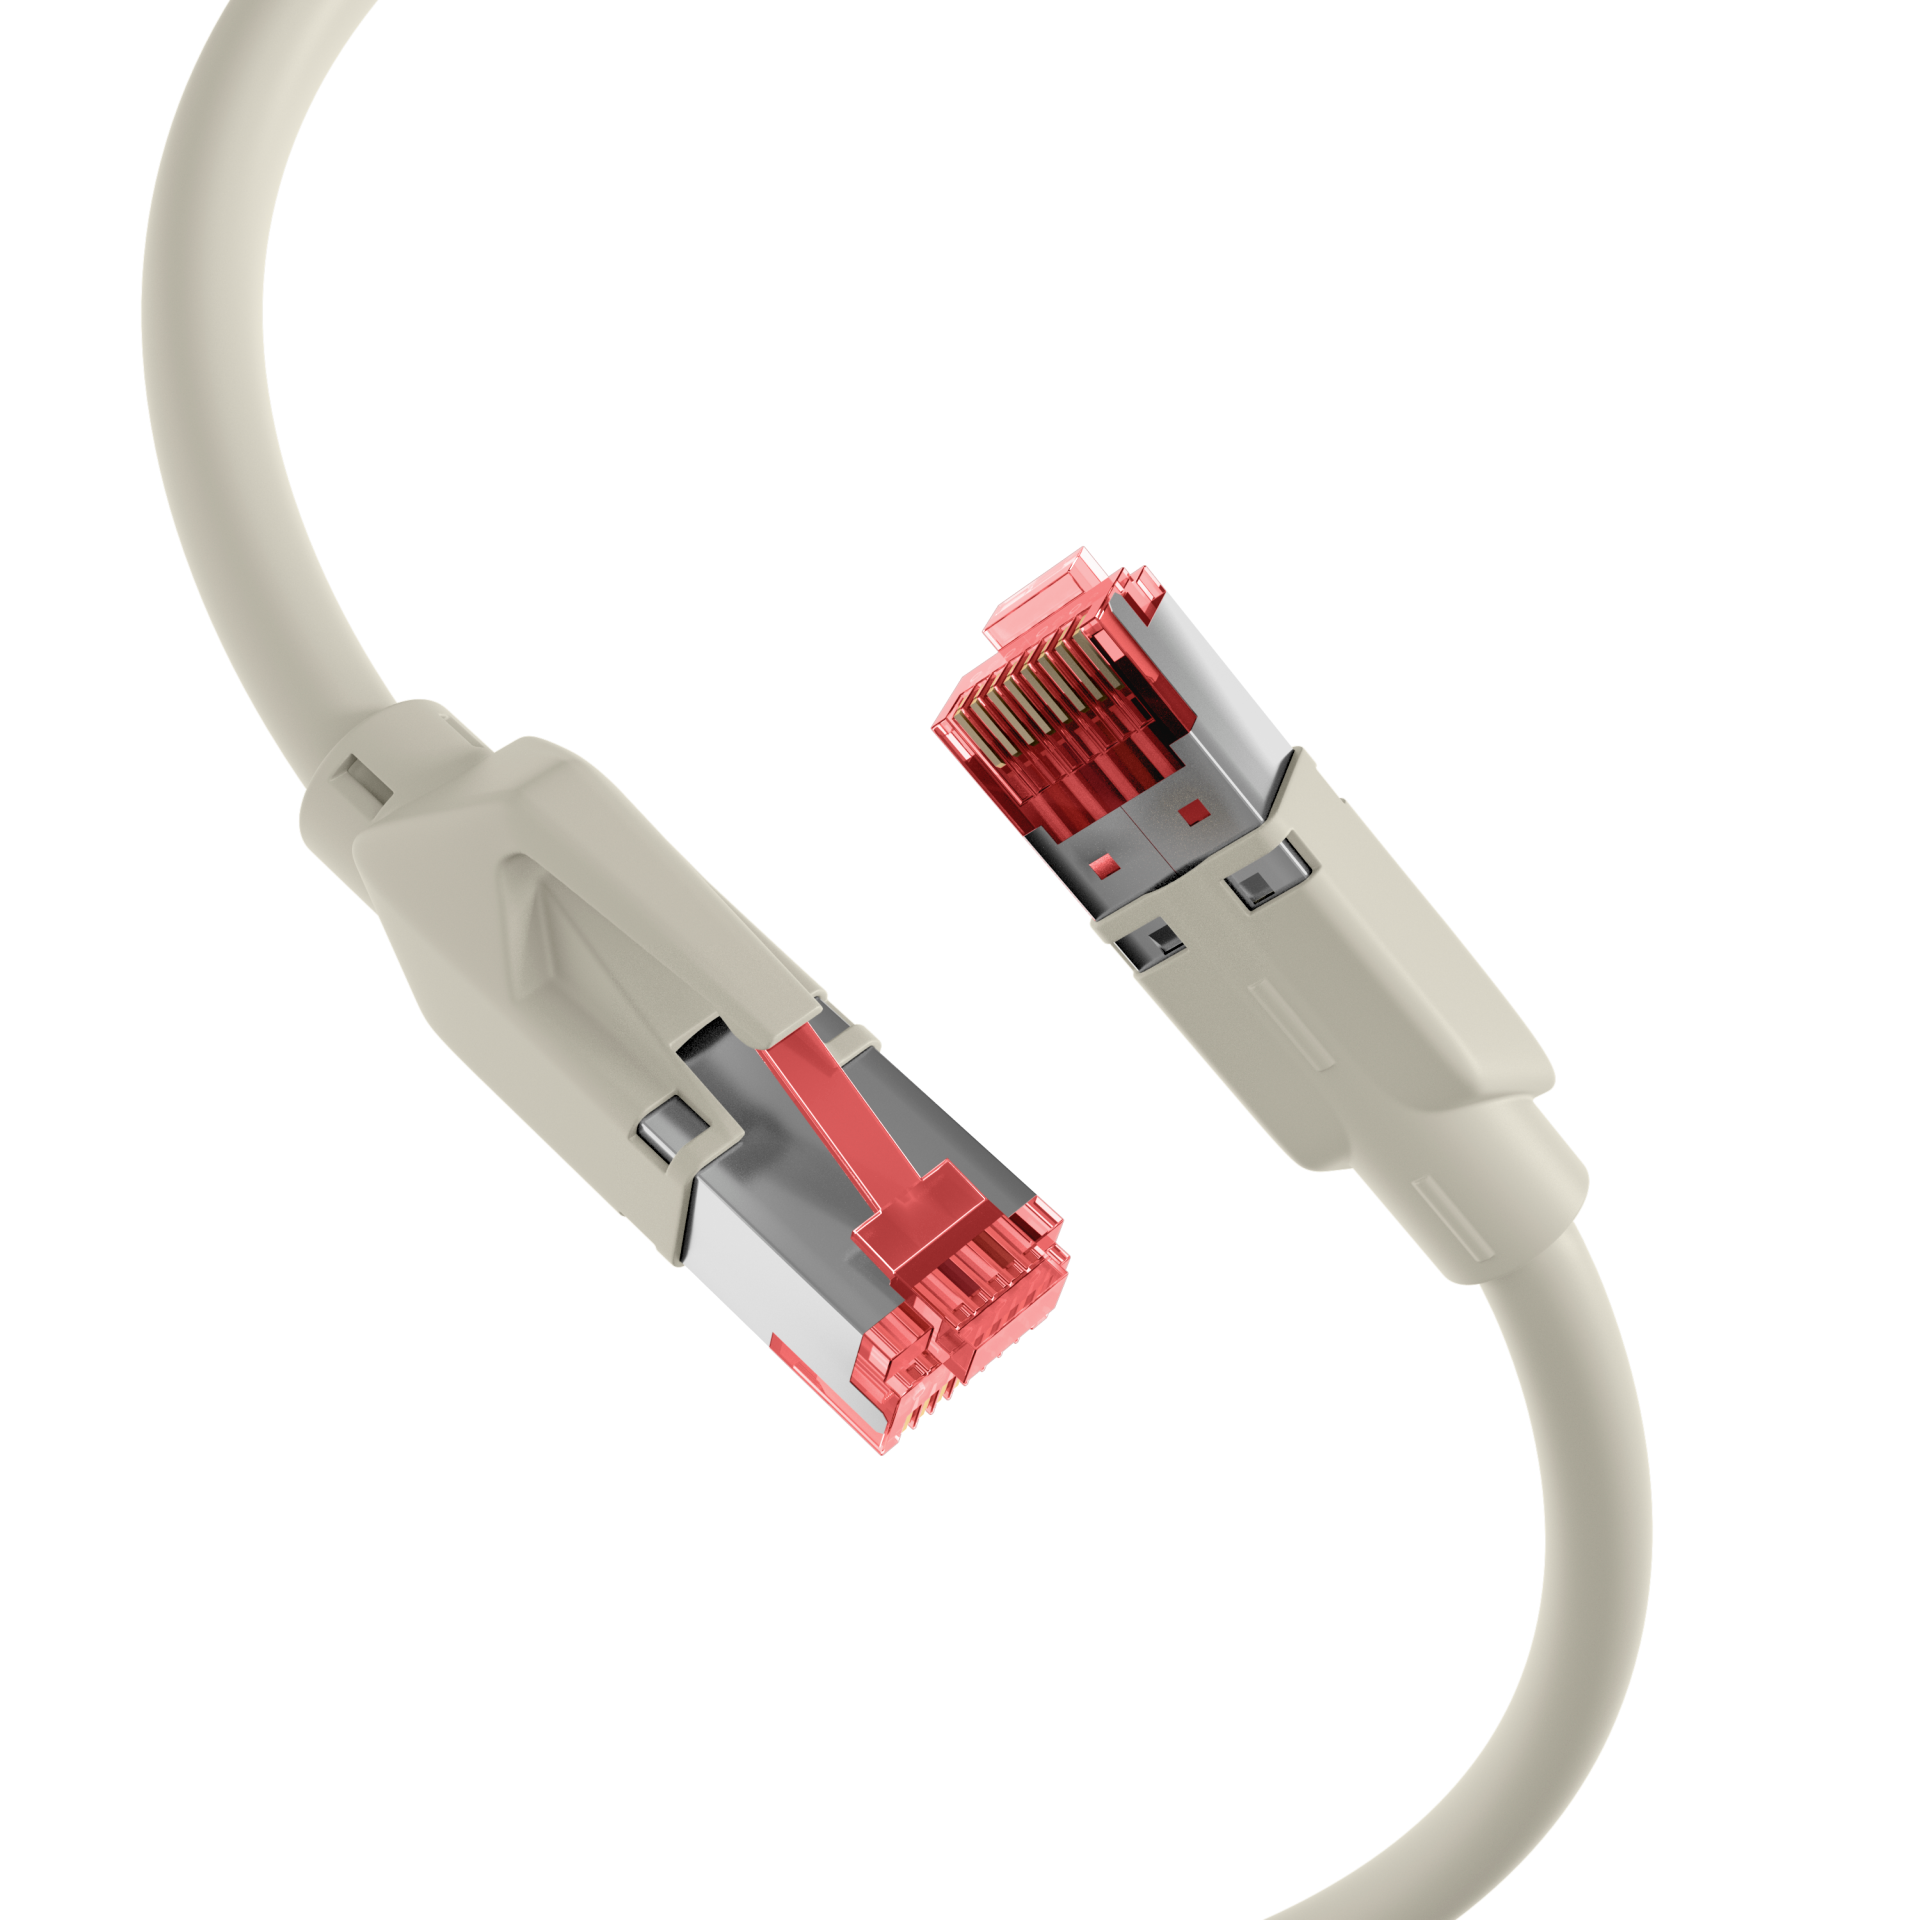 RJ45 Crossover Patch cable S/FTP, Cat.6, TM21, UC900, 0,5m, grey